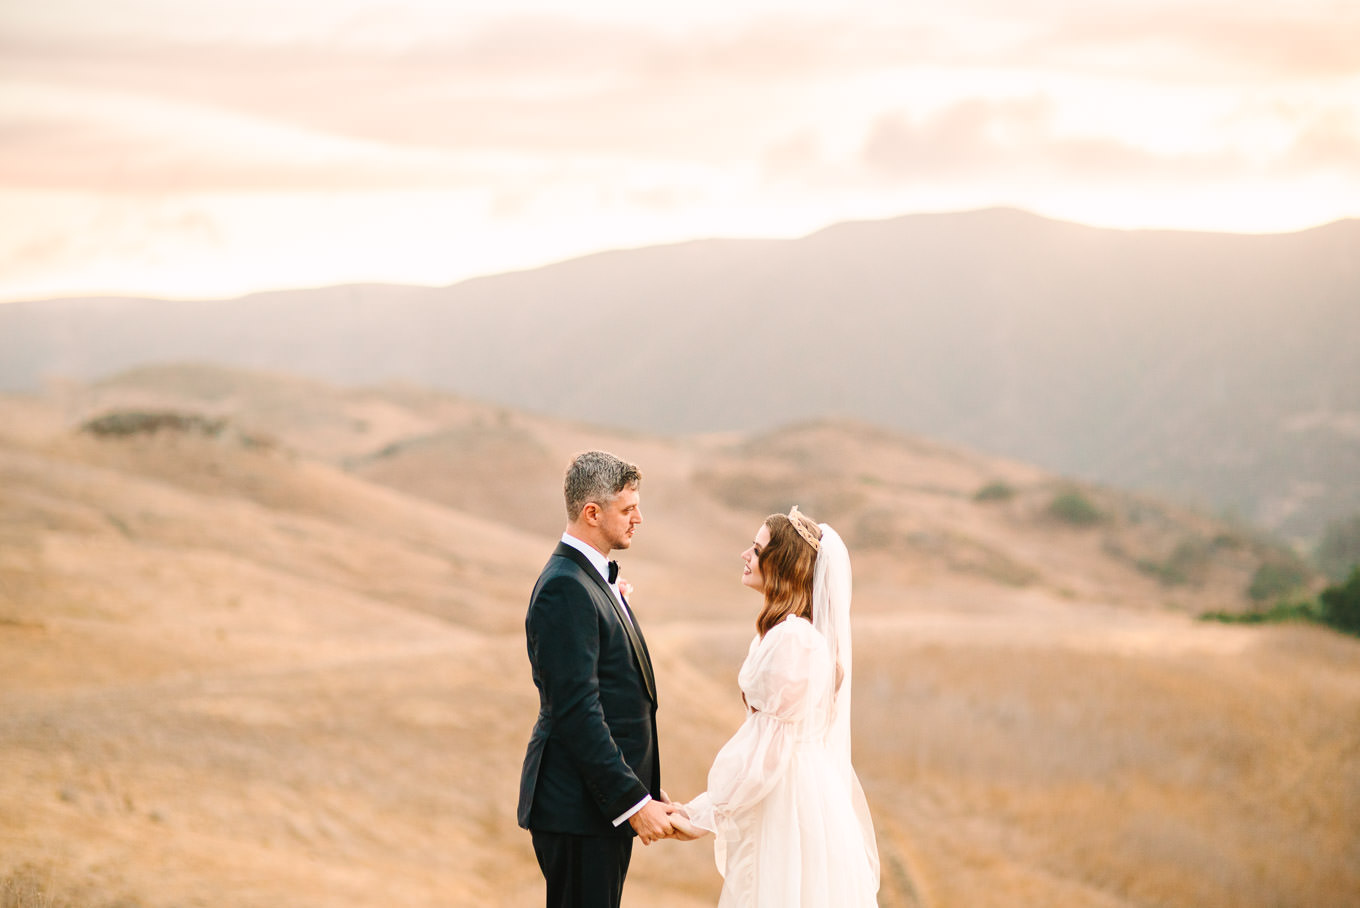 Bride and groom sunset wedding portraits | Allison Harvard’s colorful and quirky wedding at Higuera Ranch in San Luis Obispo | #sanluisobispowedding #californiawedding #higueraranch #madonnainn   Source: Mary Costa Photography | Los Angeles